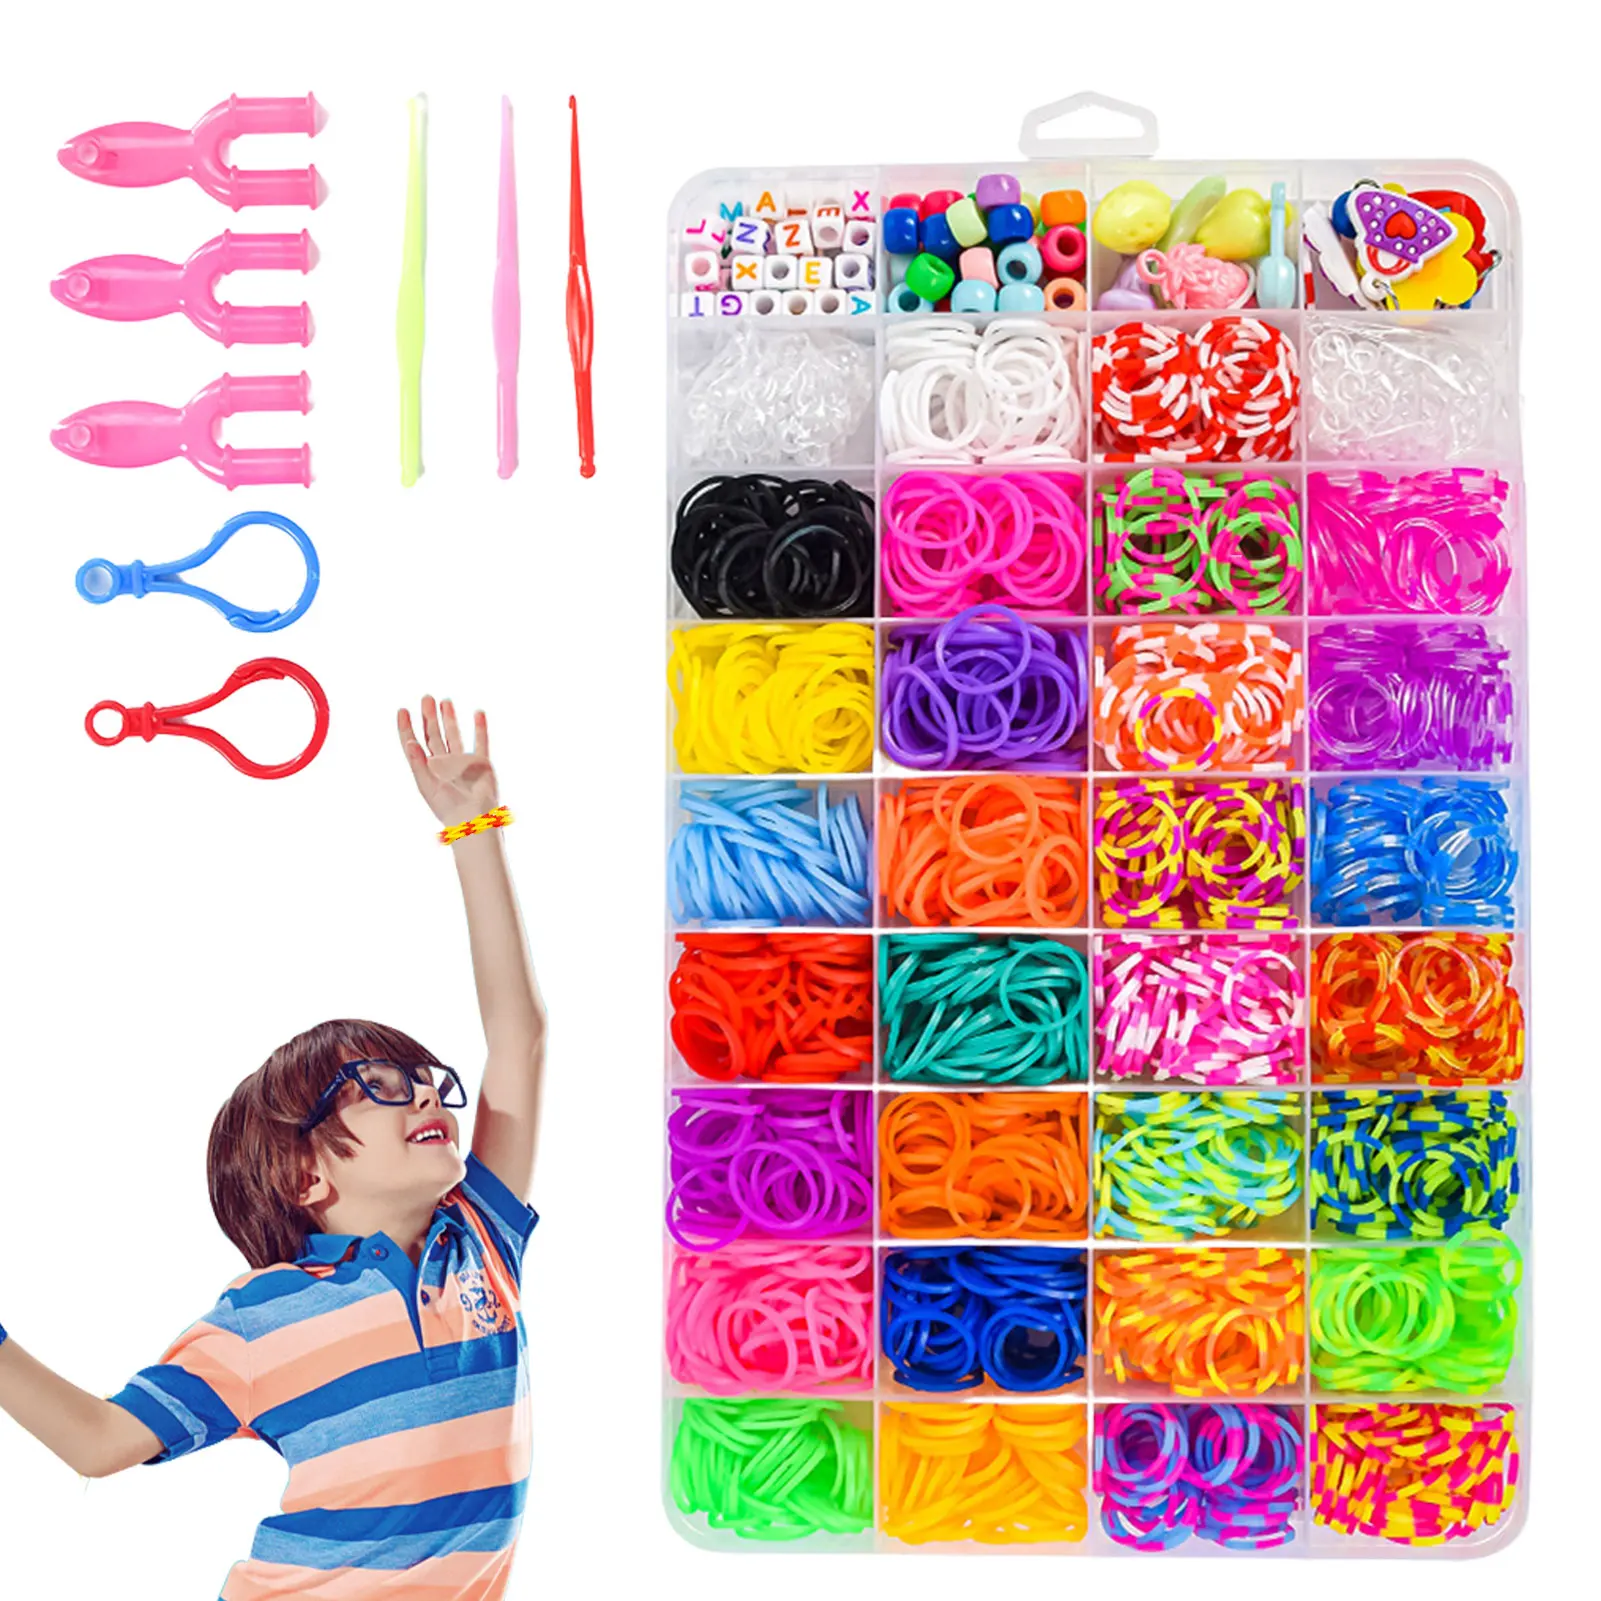 

Loom Band Refill Kit Colorful Loom Band Kit 1400 30 Colors Loom Band Starter Set Craft Kit For Kids Friendship Jewellery